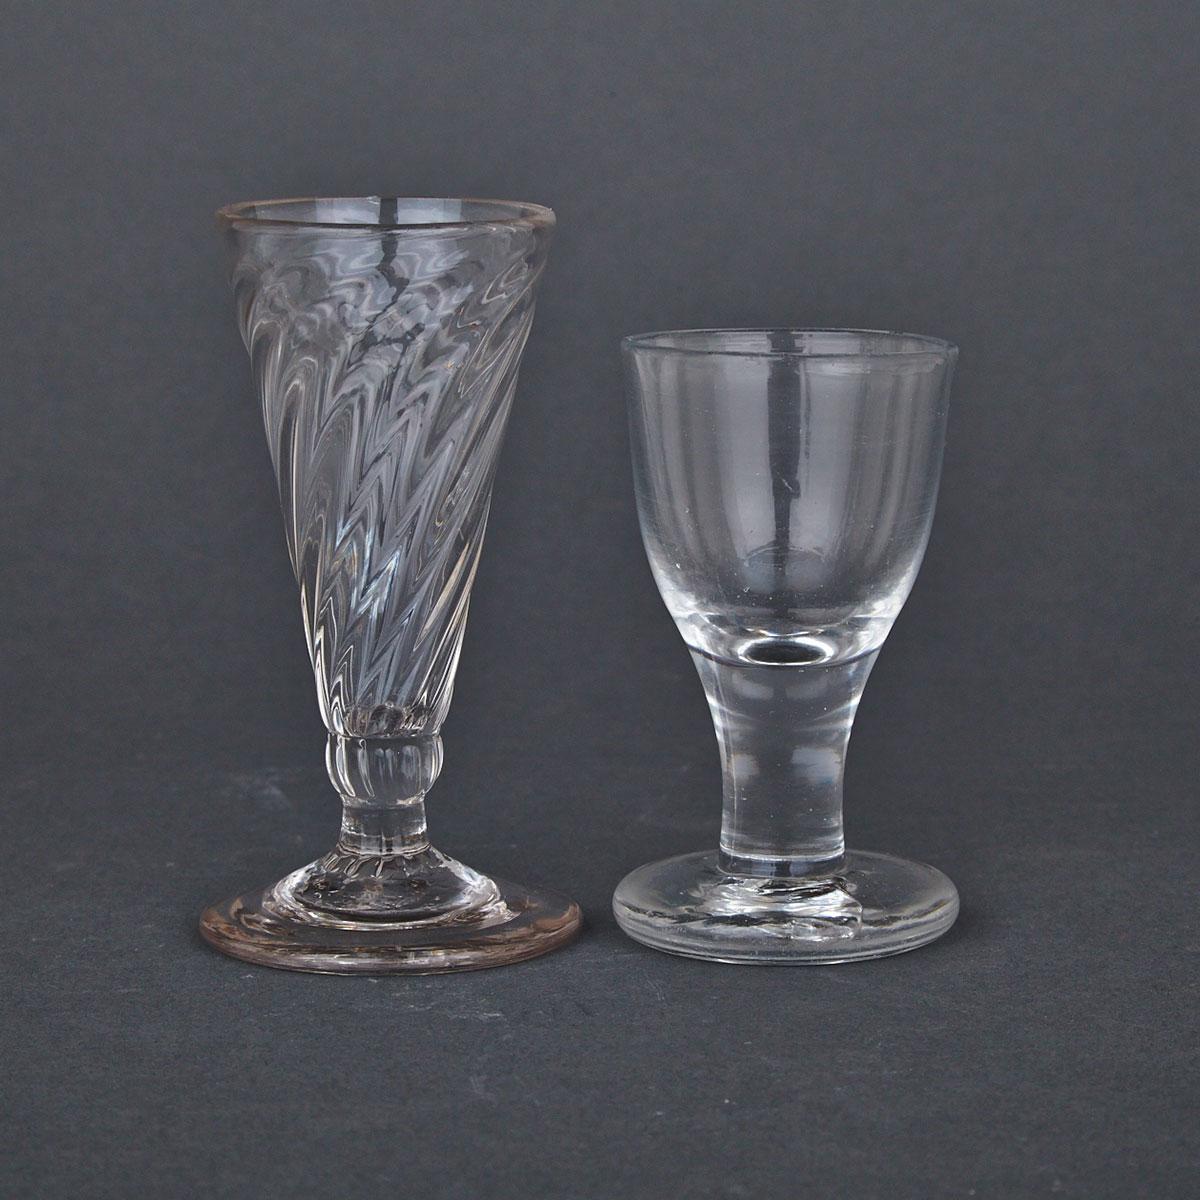 Two English Drinking Glasses, c.1800